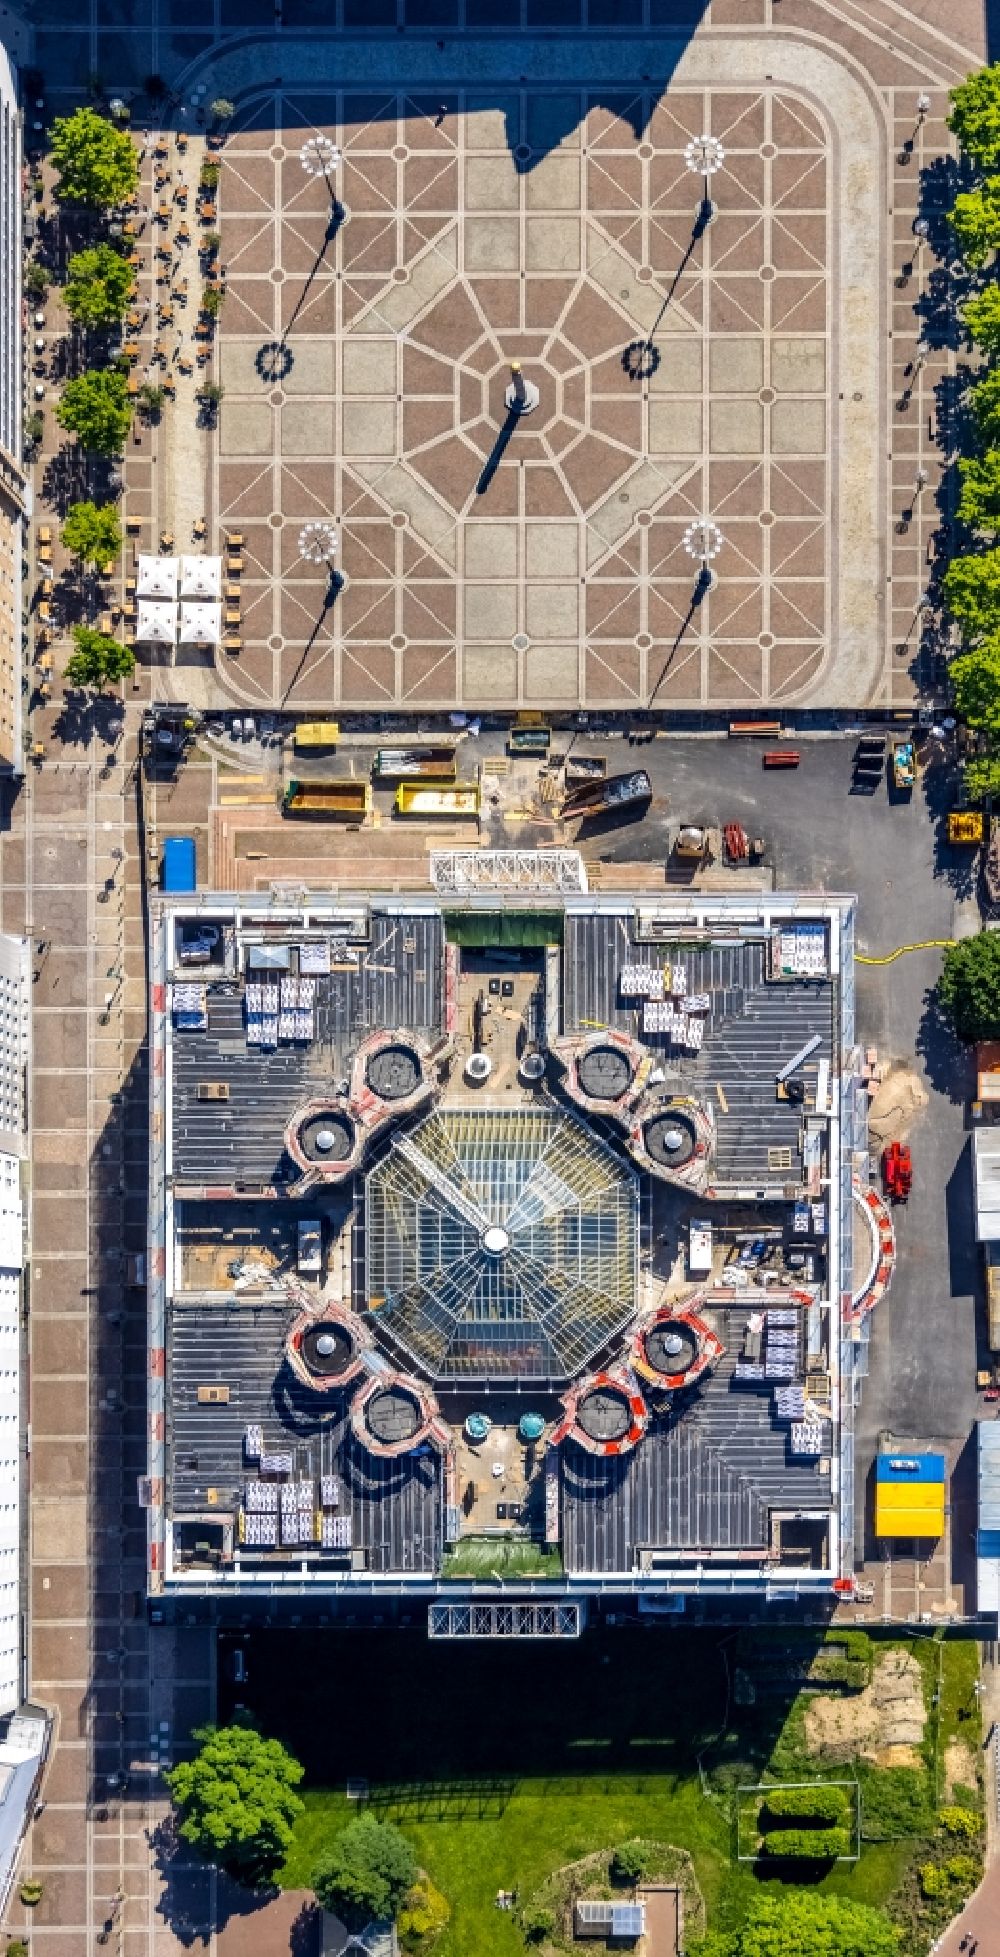 Vertical aerial photograph Dortmund - Vertical aerial view from the satellite perspective of the town Hall building of the City Council at the market downtown in Dortmund at Ruhrgebiet in the state North Rhine-Westphalia, Germany